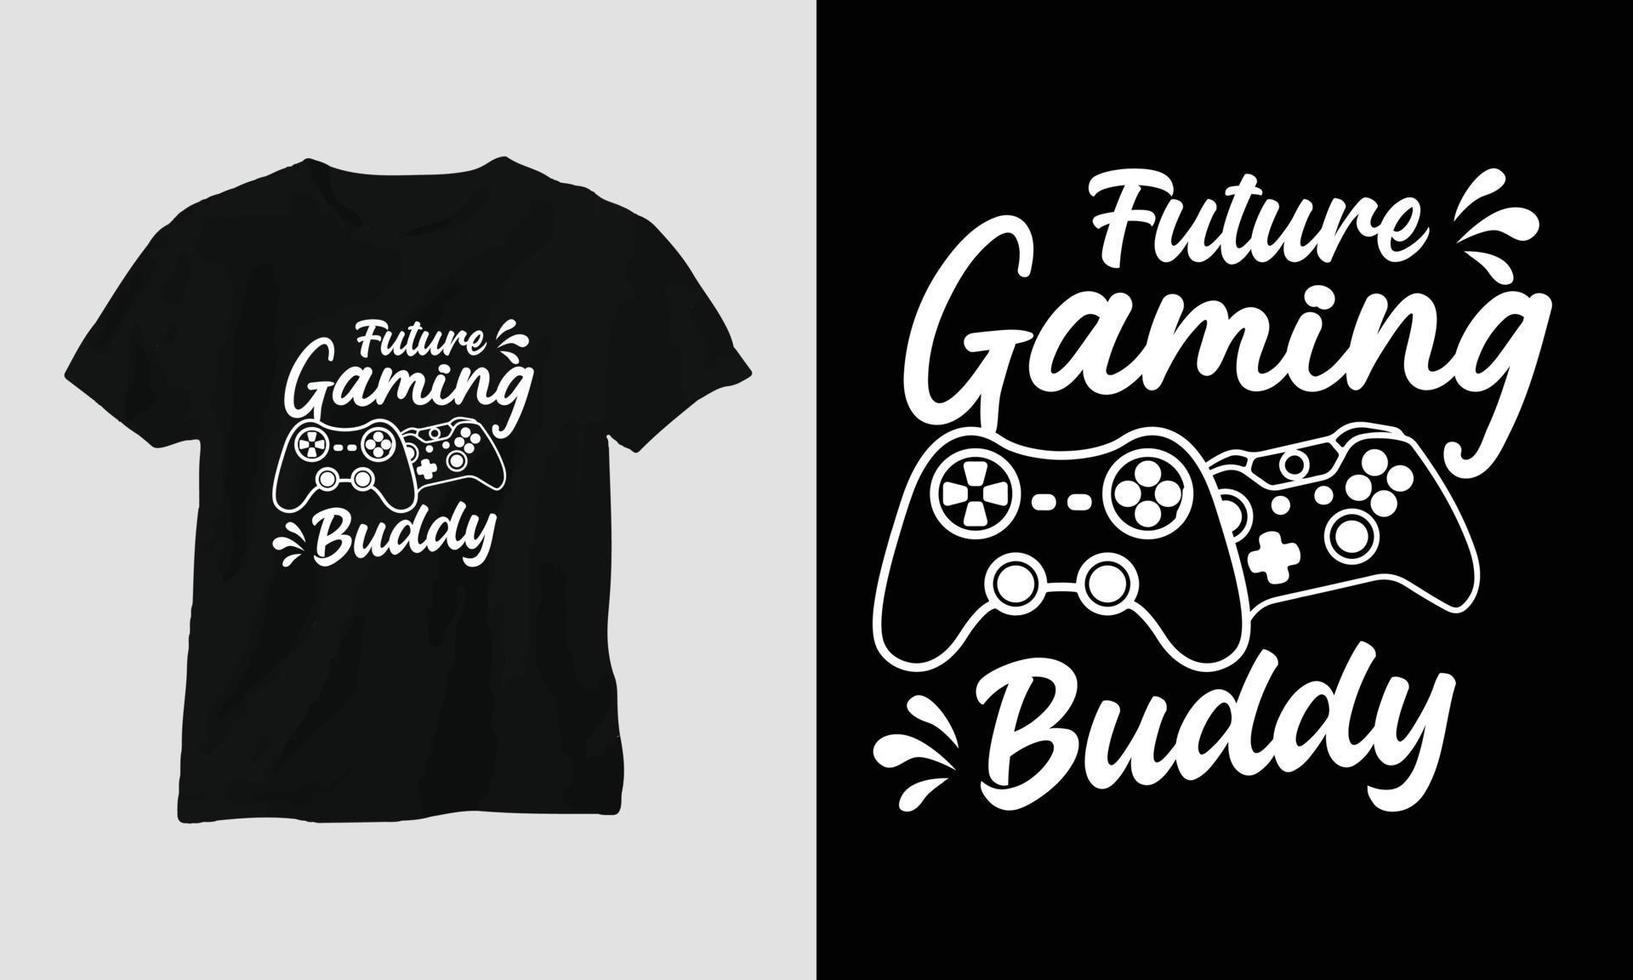 future gaming buddy - Gamer quotes T-shirt and apparel design. Typography, Poster, Emblem, Video Games, love, Gaming vector